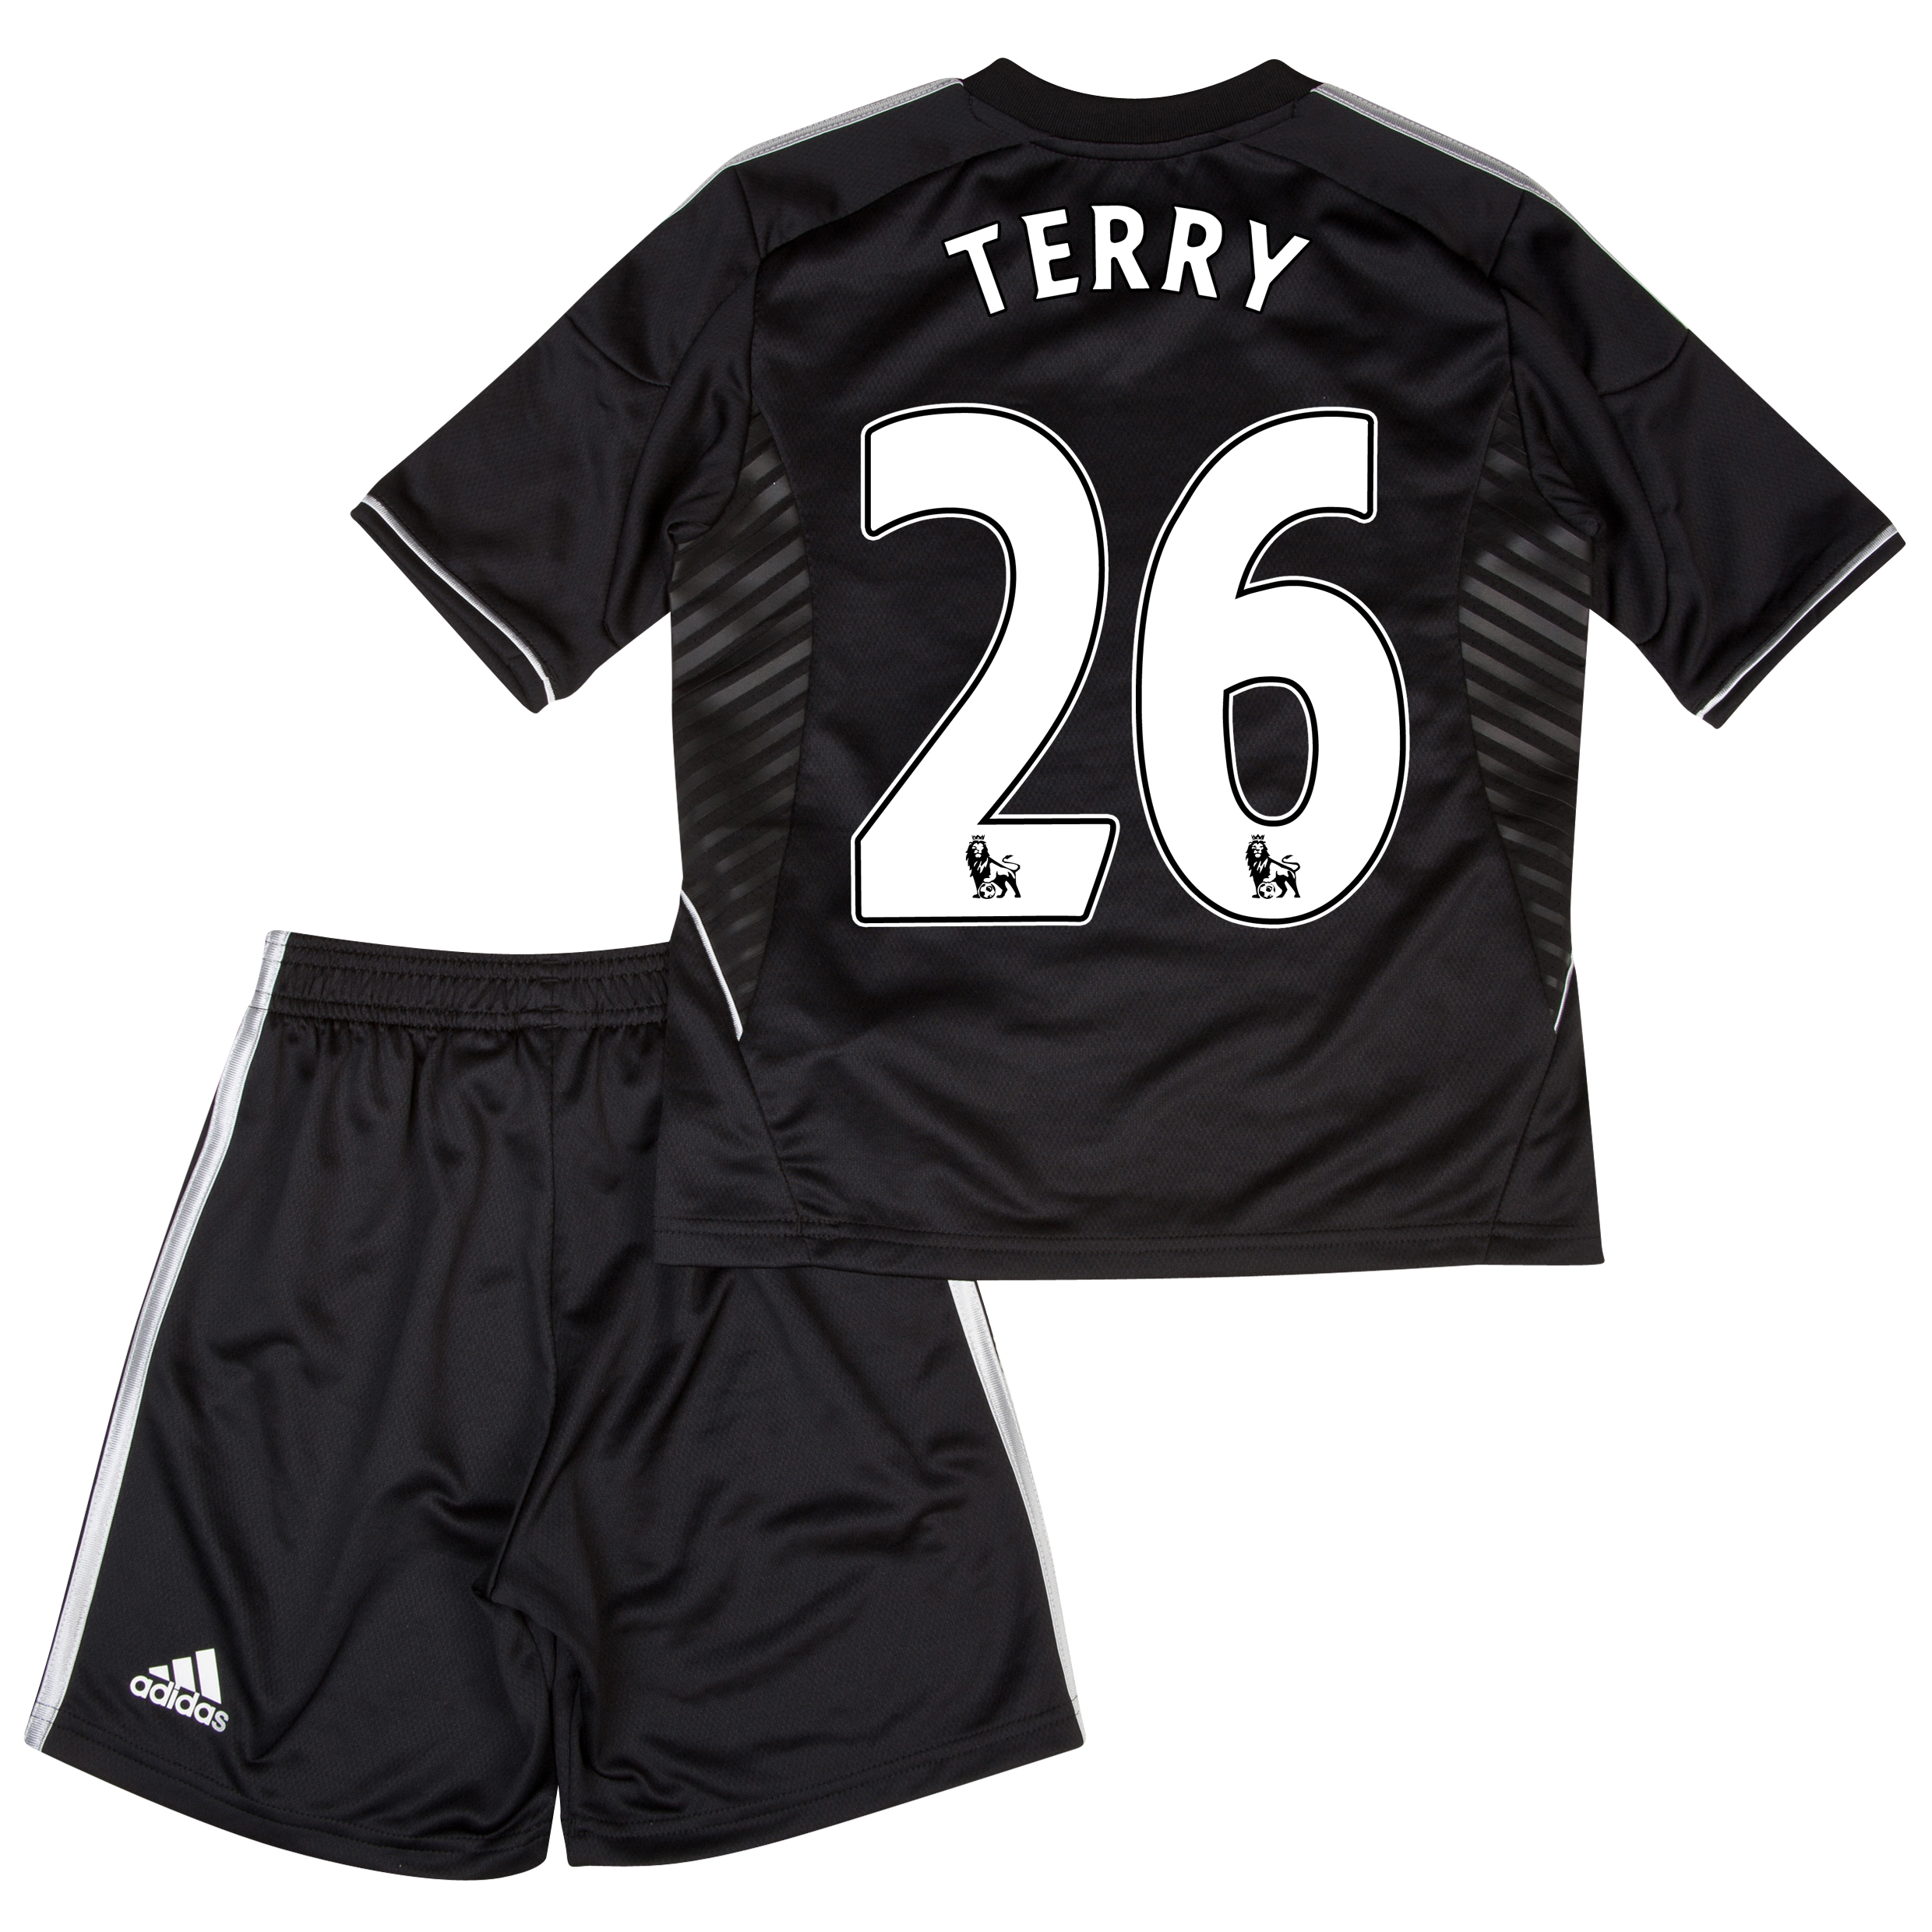 Chelsea Third Mini Kit 2013/14 with Terry 26 printing